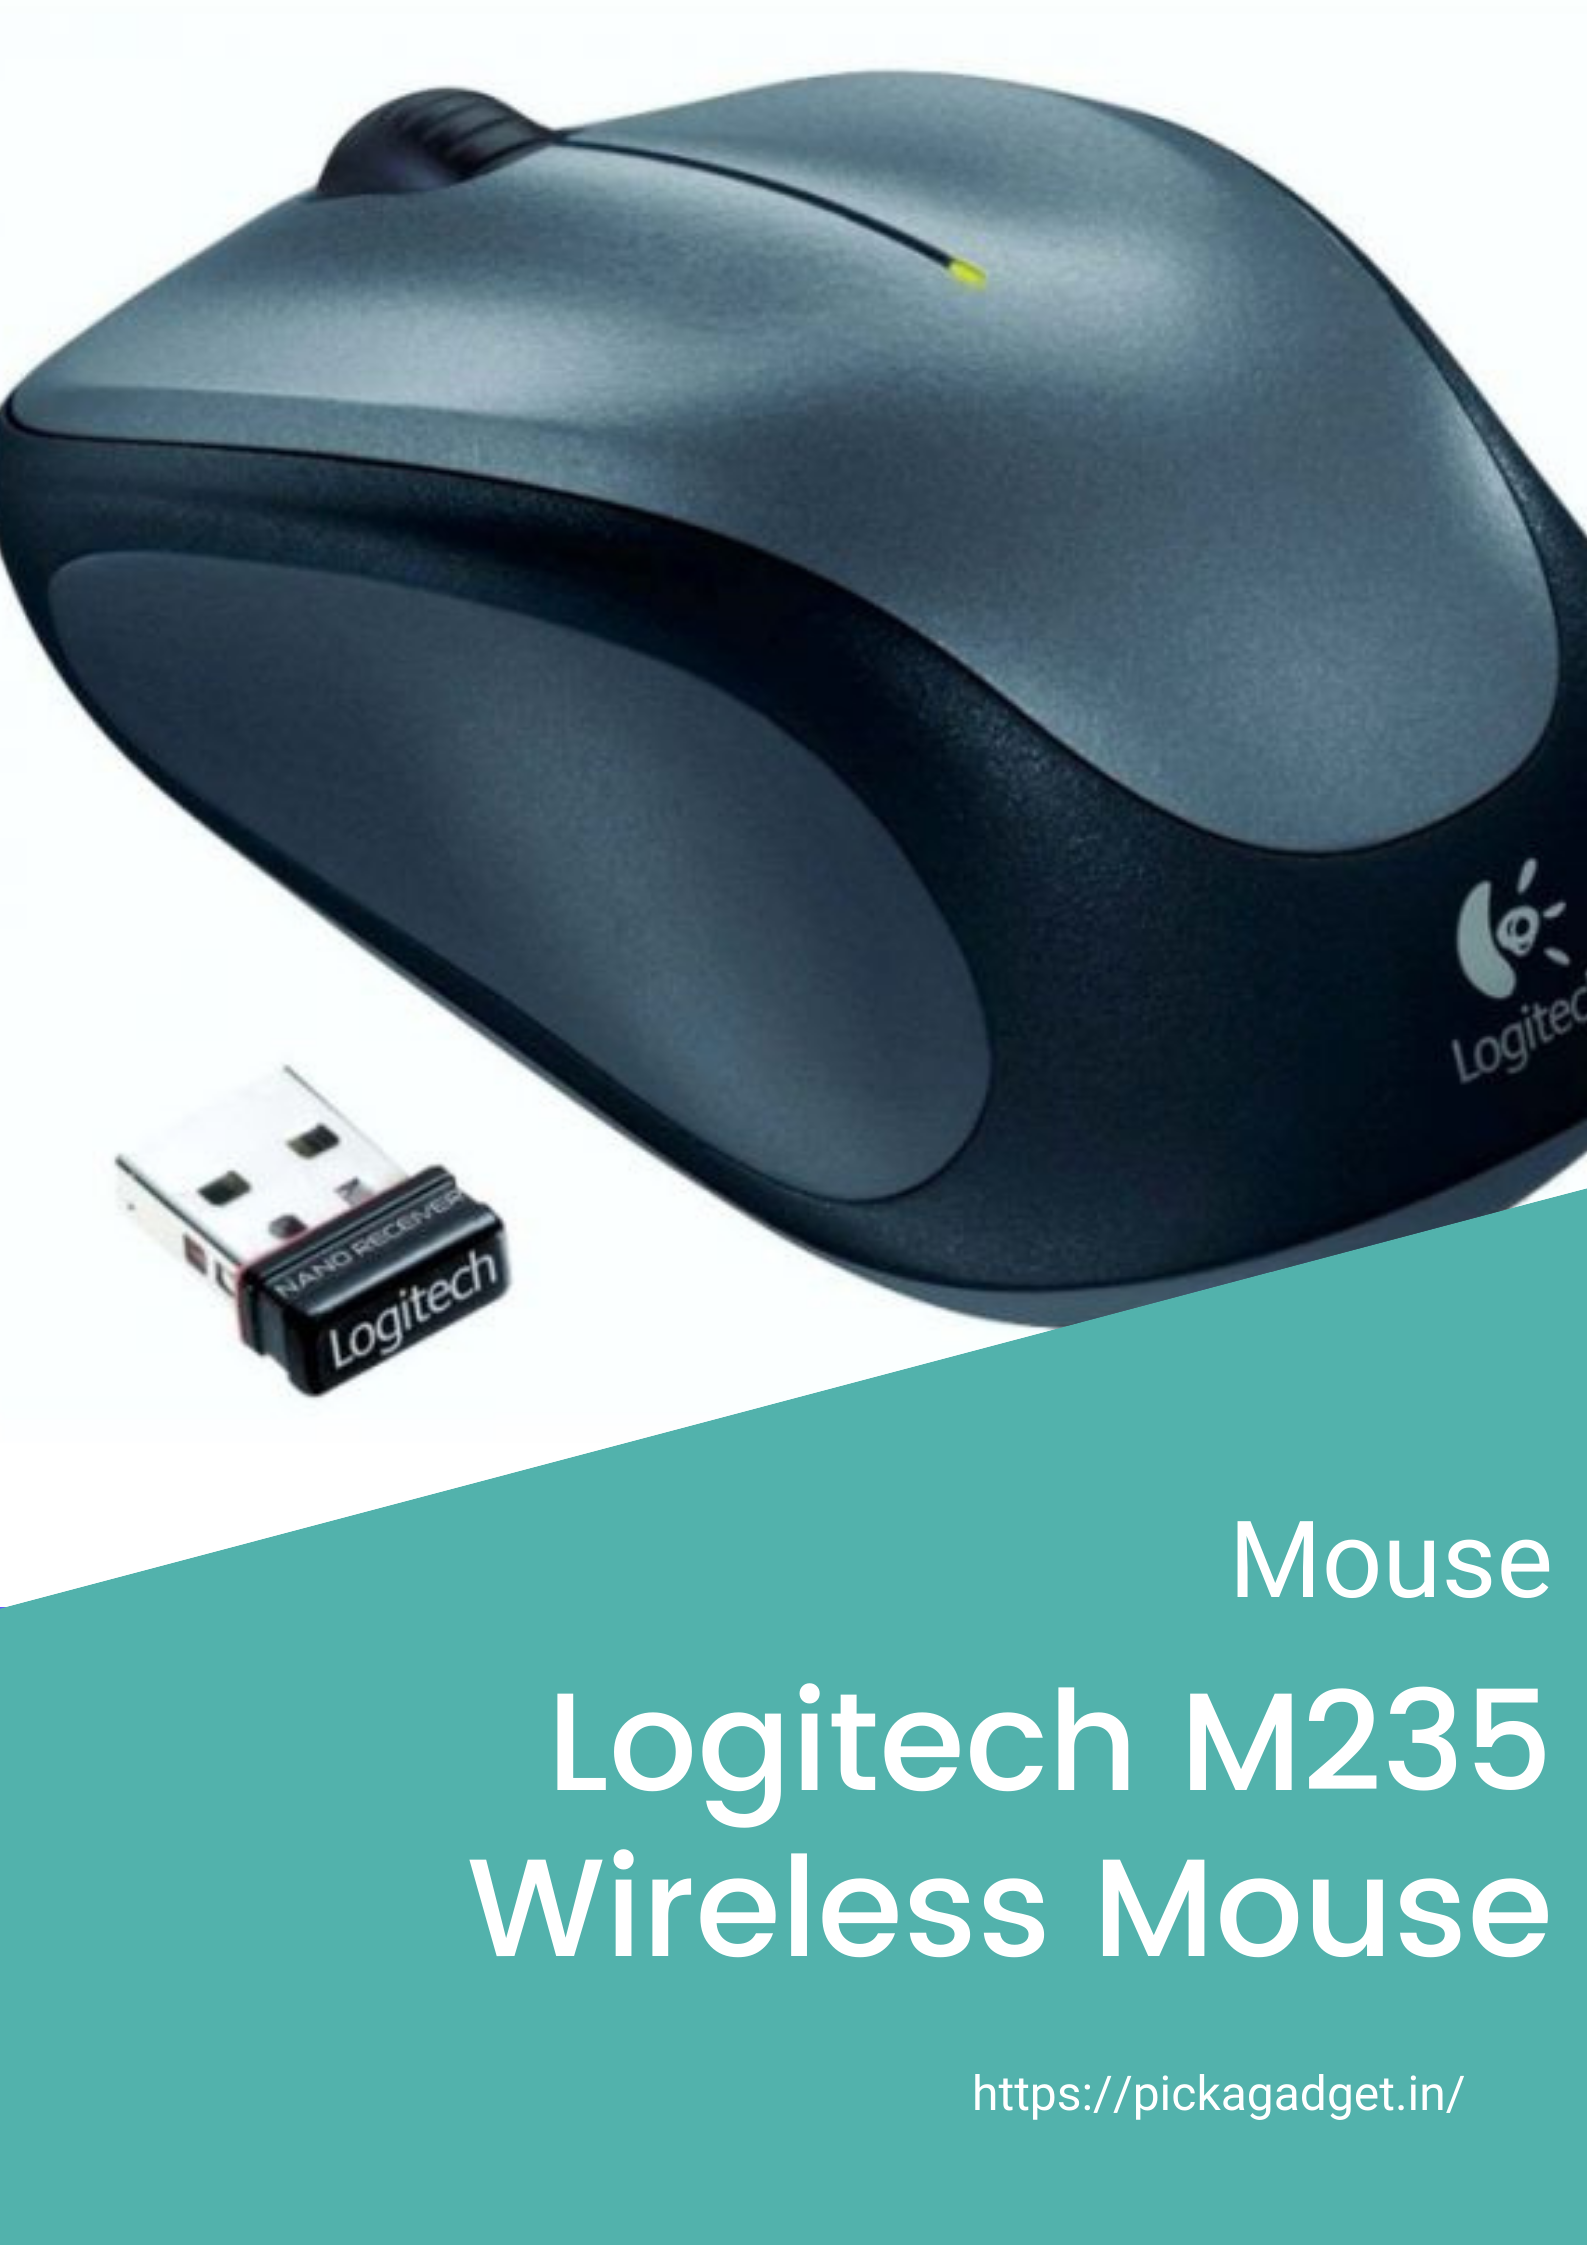 Logitech M235 Wireless Mouse after 2 YEARS USE.